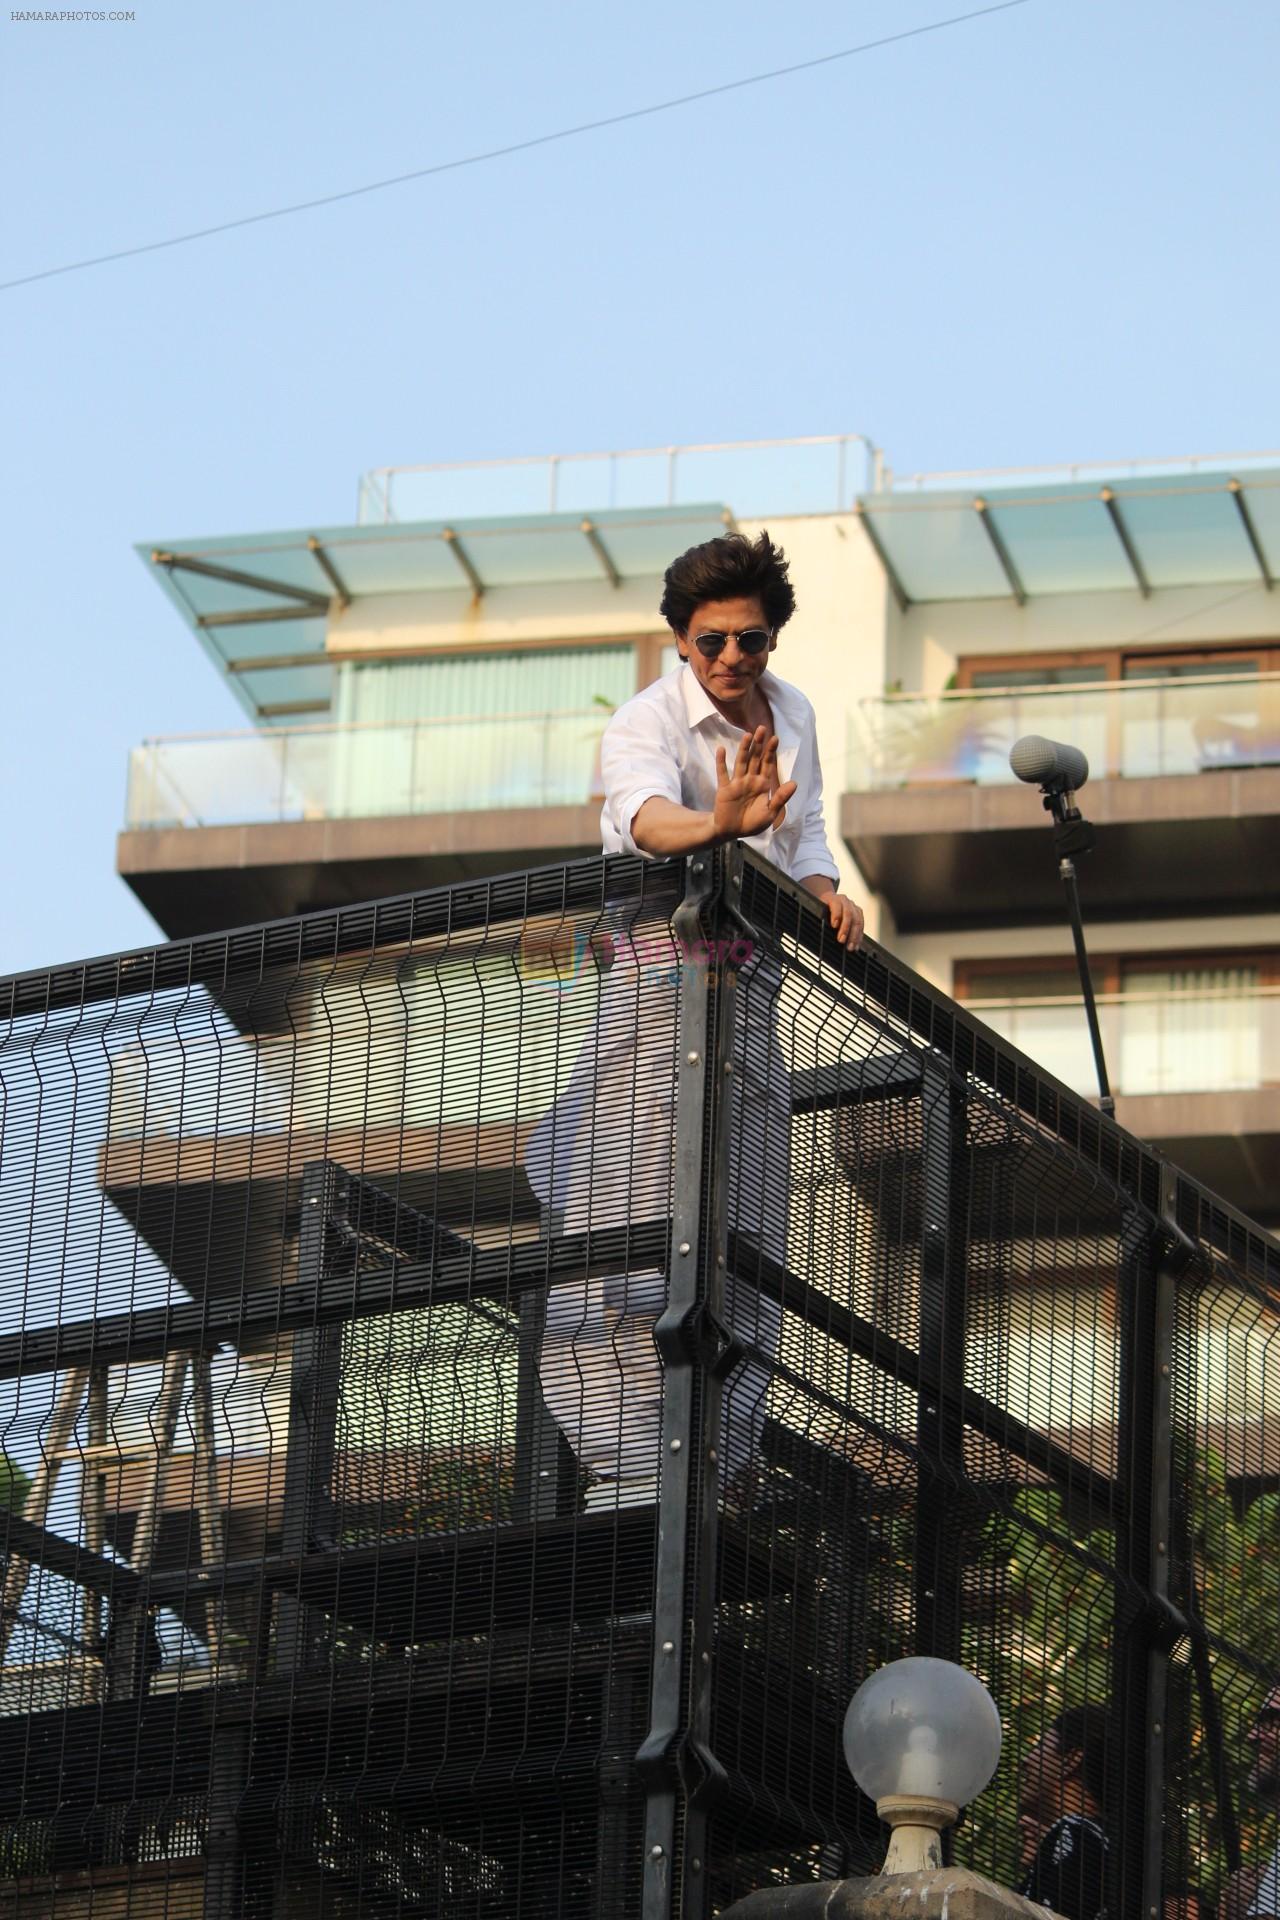 Shahrukh Khan with son Abram waves the fans on Eid at his bandra residence on 5th June 2019